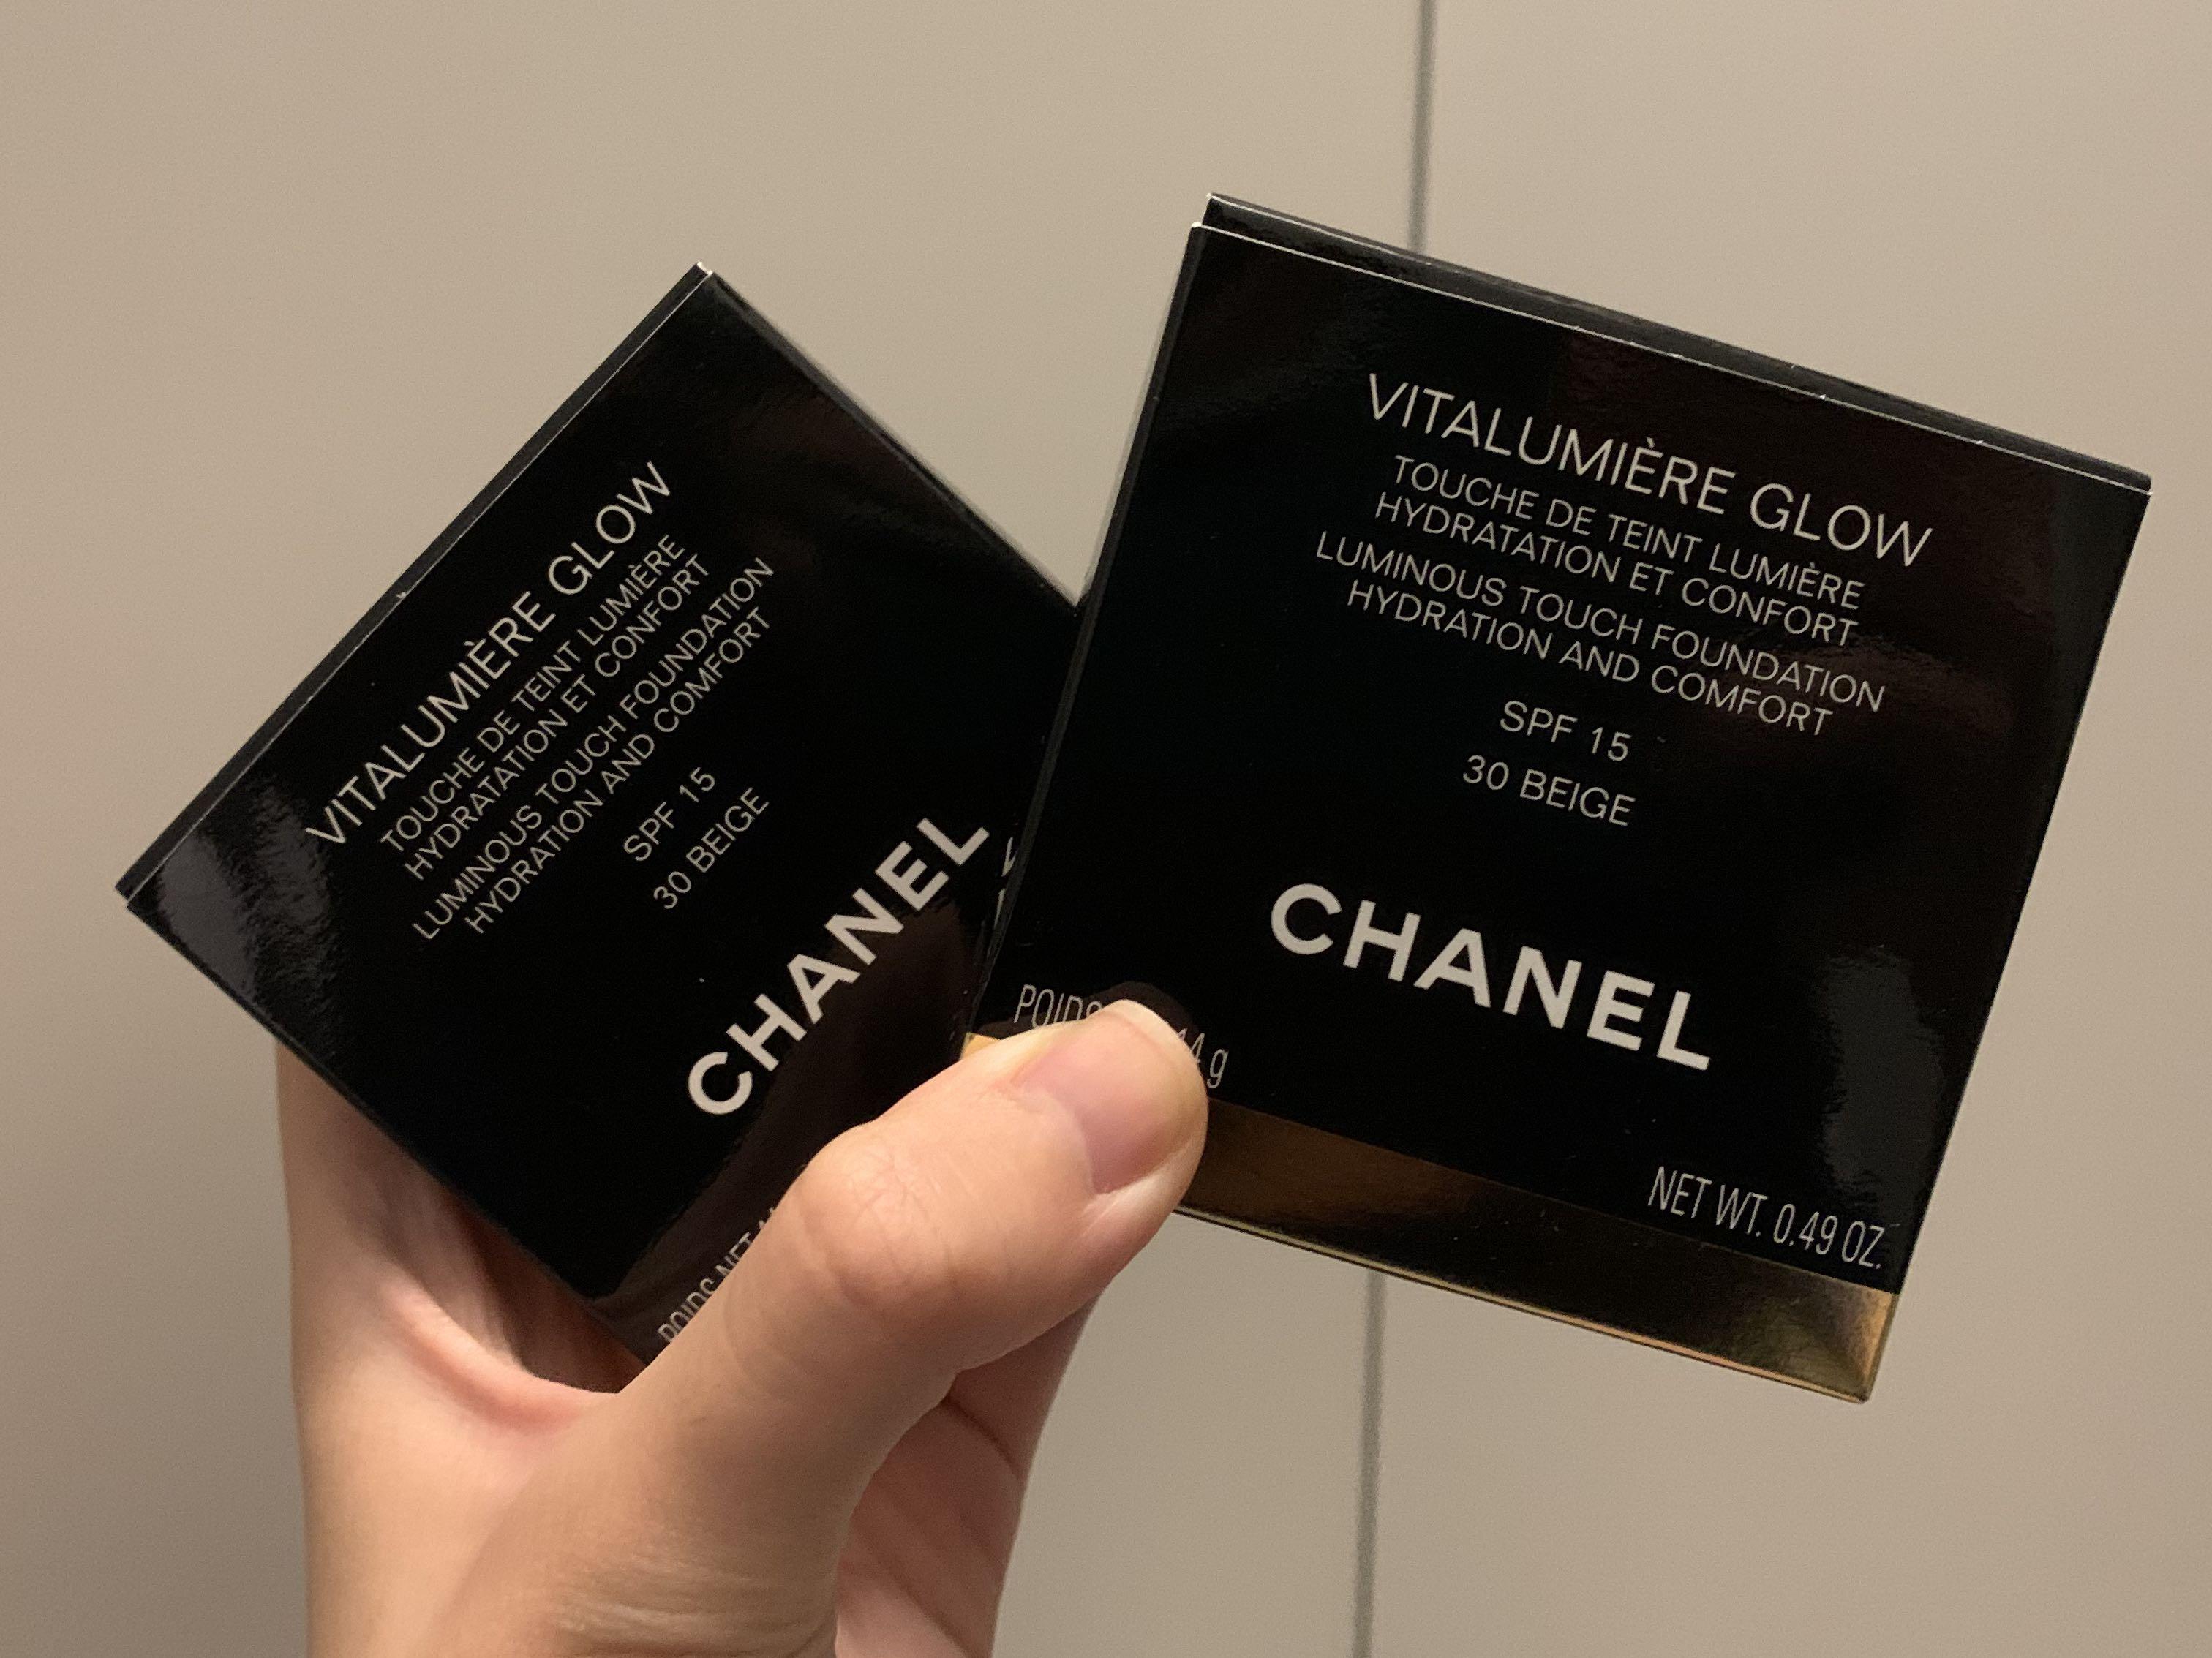 Chanel Vitalumiere glow Luminous Touch Foundation Hydration and Comfort  SPF15